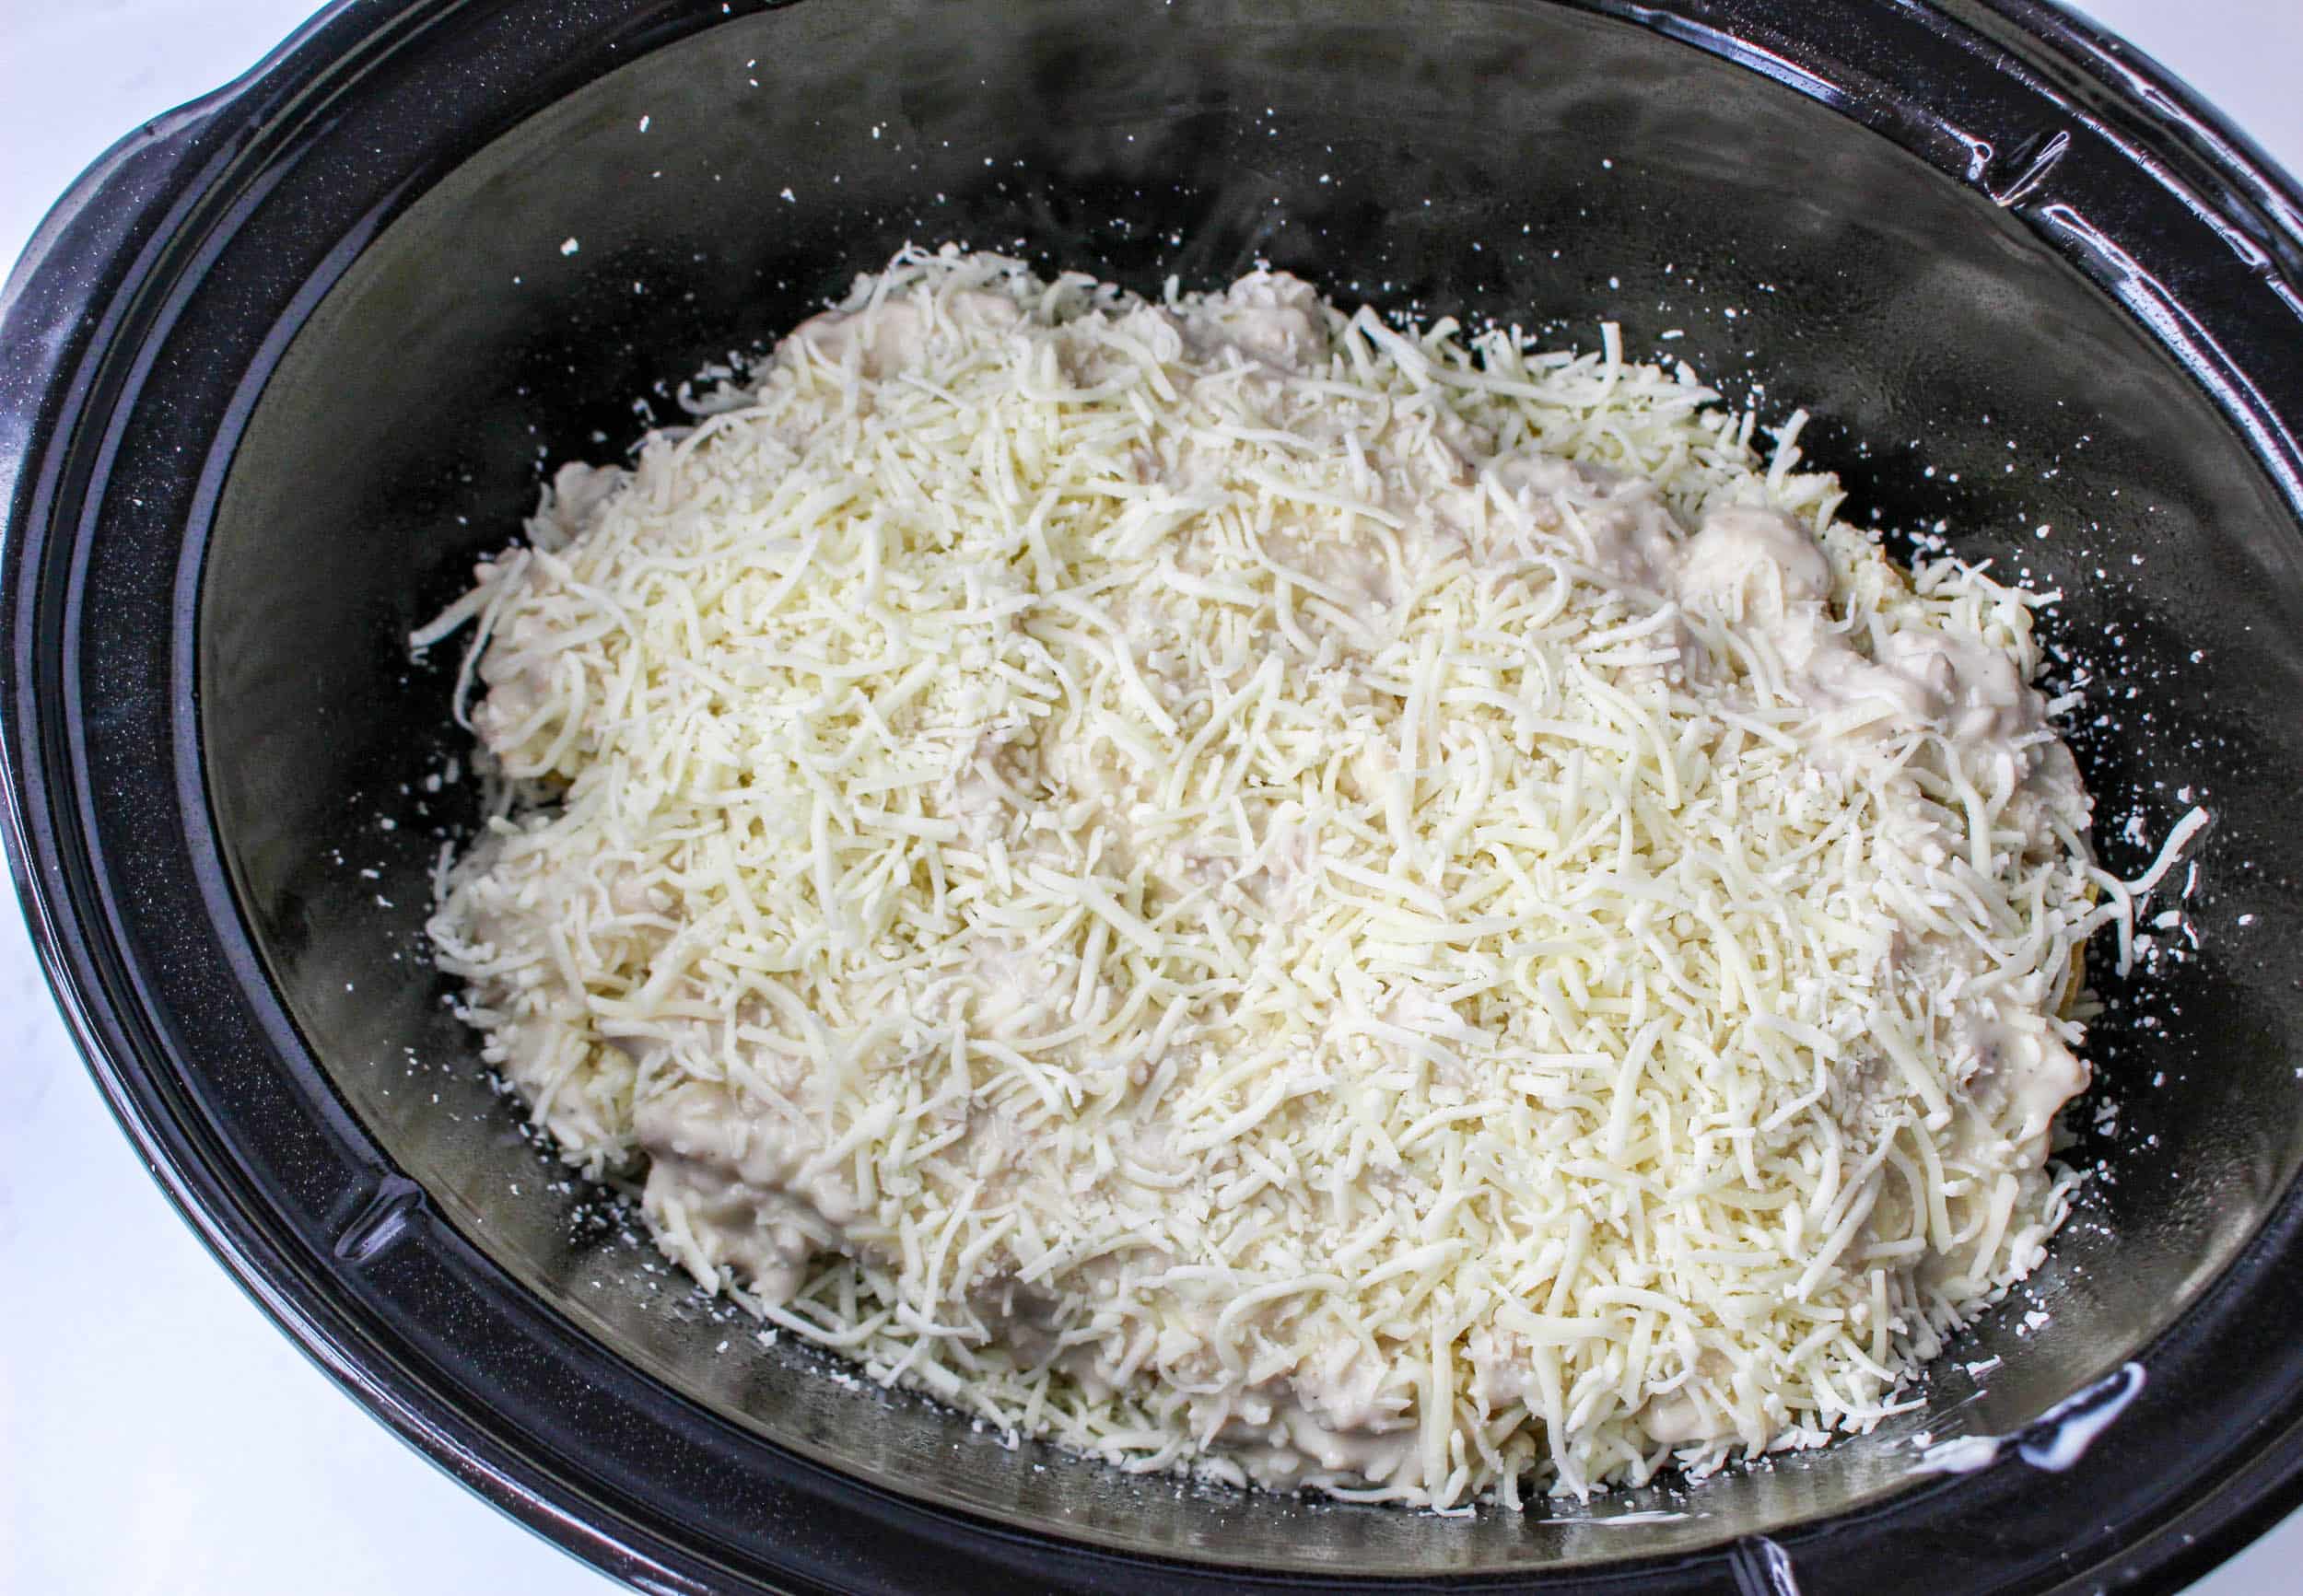 cheese on top of a layre on noodles in a crock pot